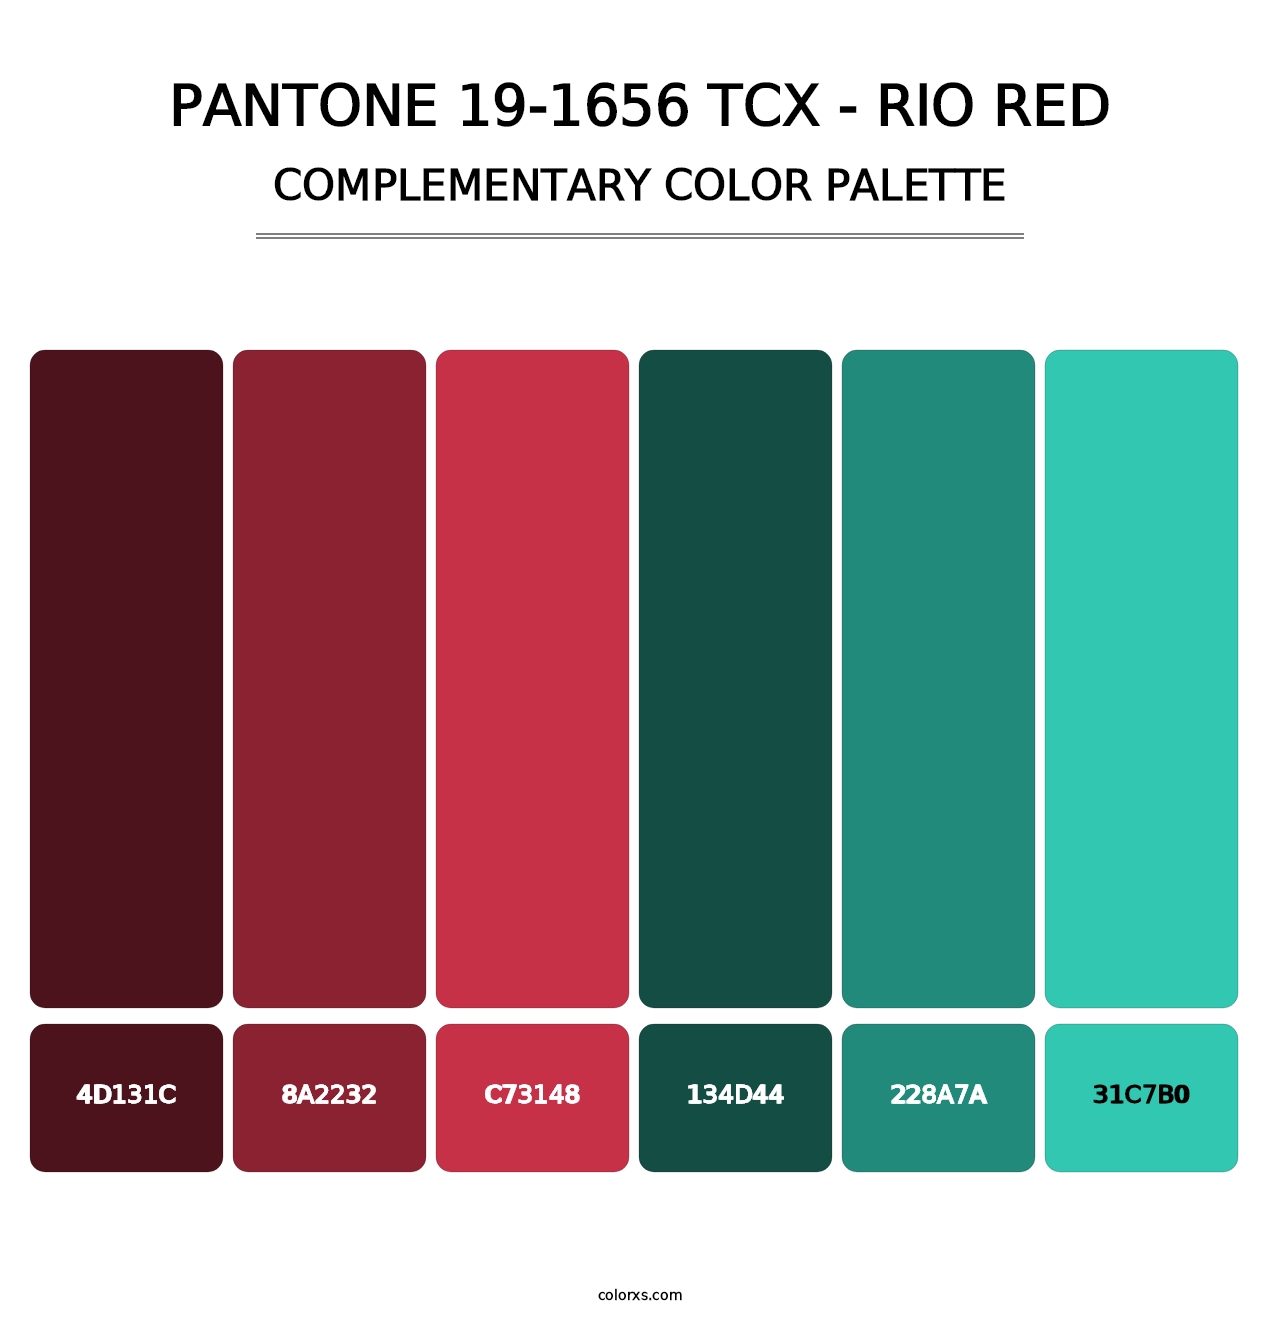 PANTONE 19-1656 TCX - Rio Red - Complementary Color Palette